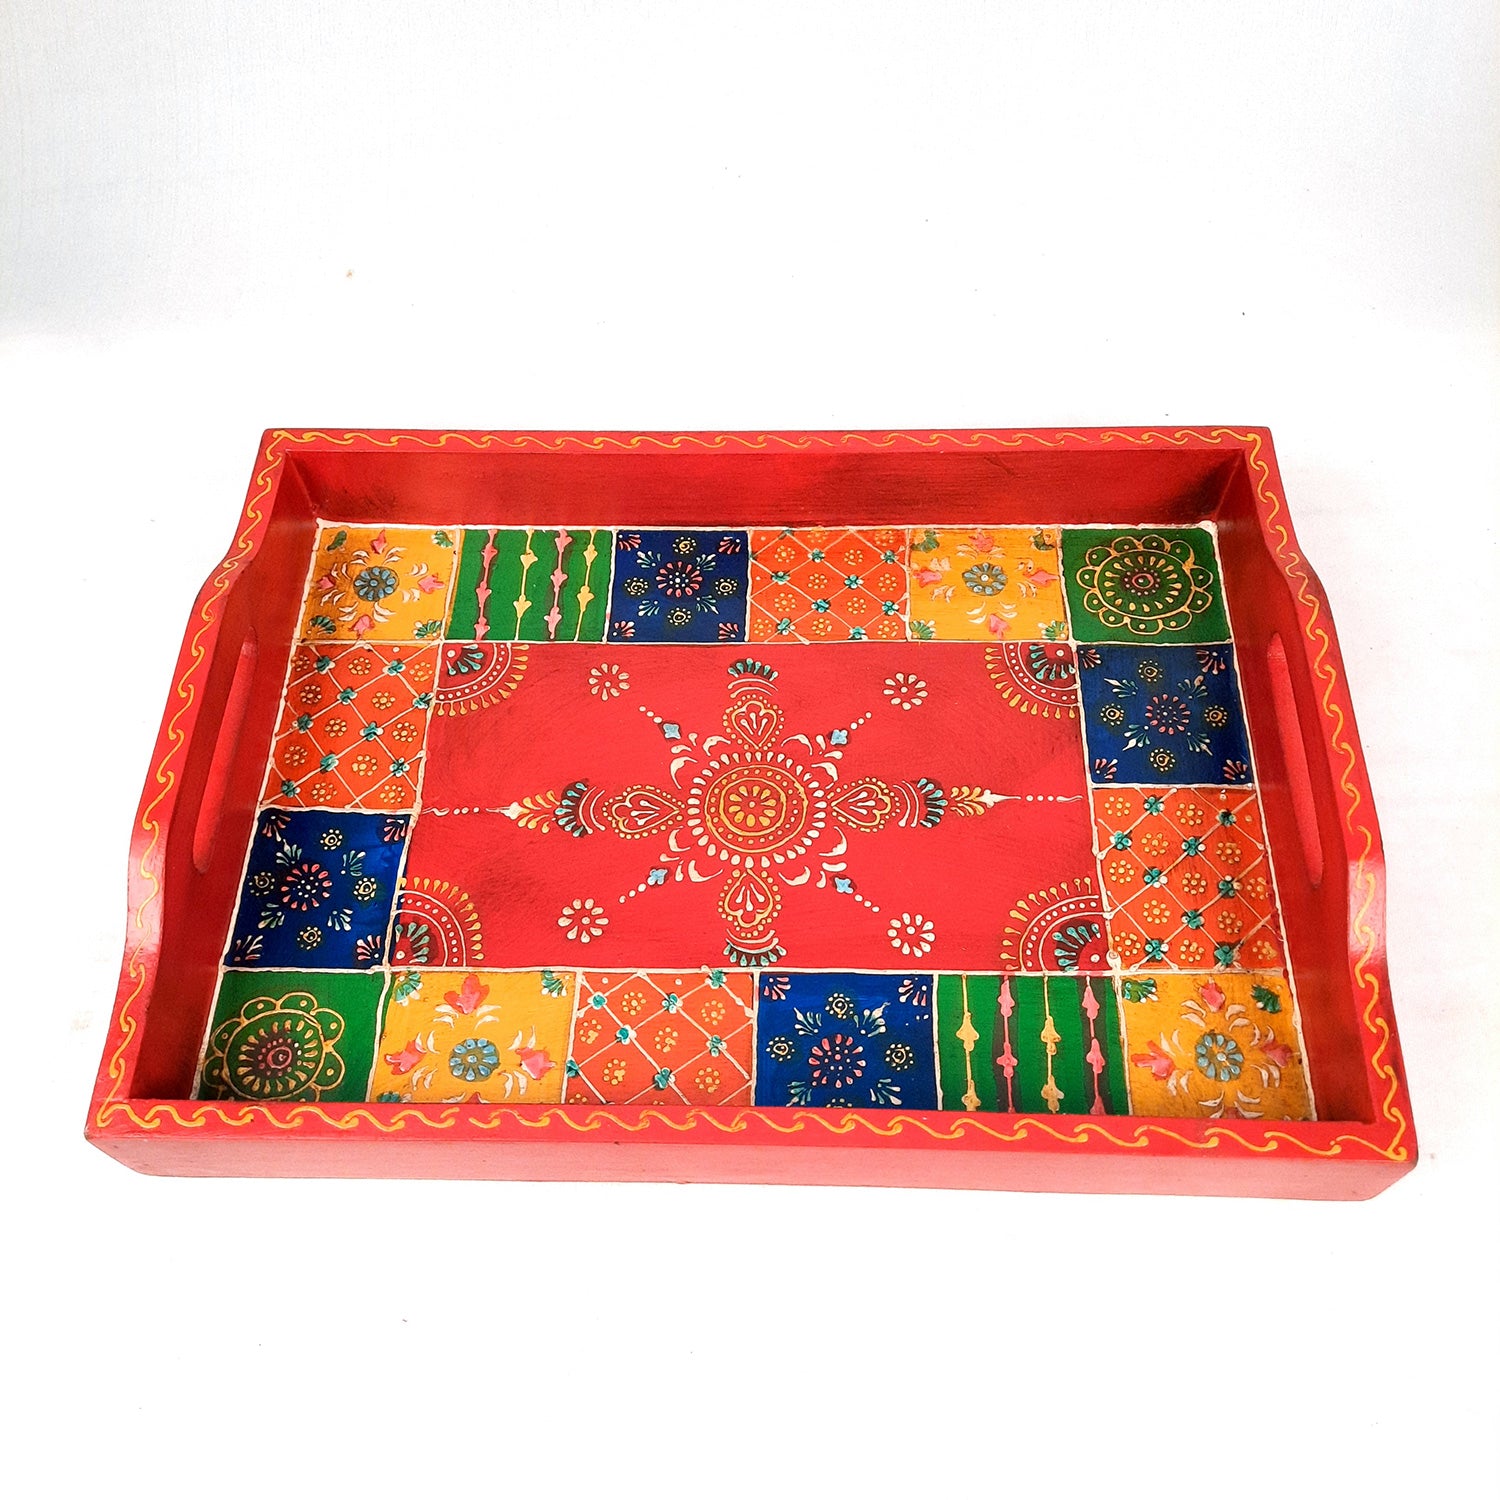 Serving Tray Wooden With Six Boxes & Lid | Mutipurpose Organizer Tray - For Dining Table, Kitchen , Organization & Gifts - Apkamart